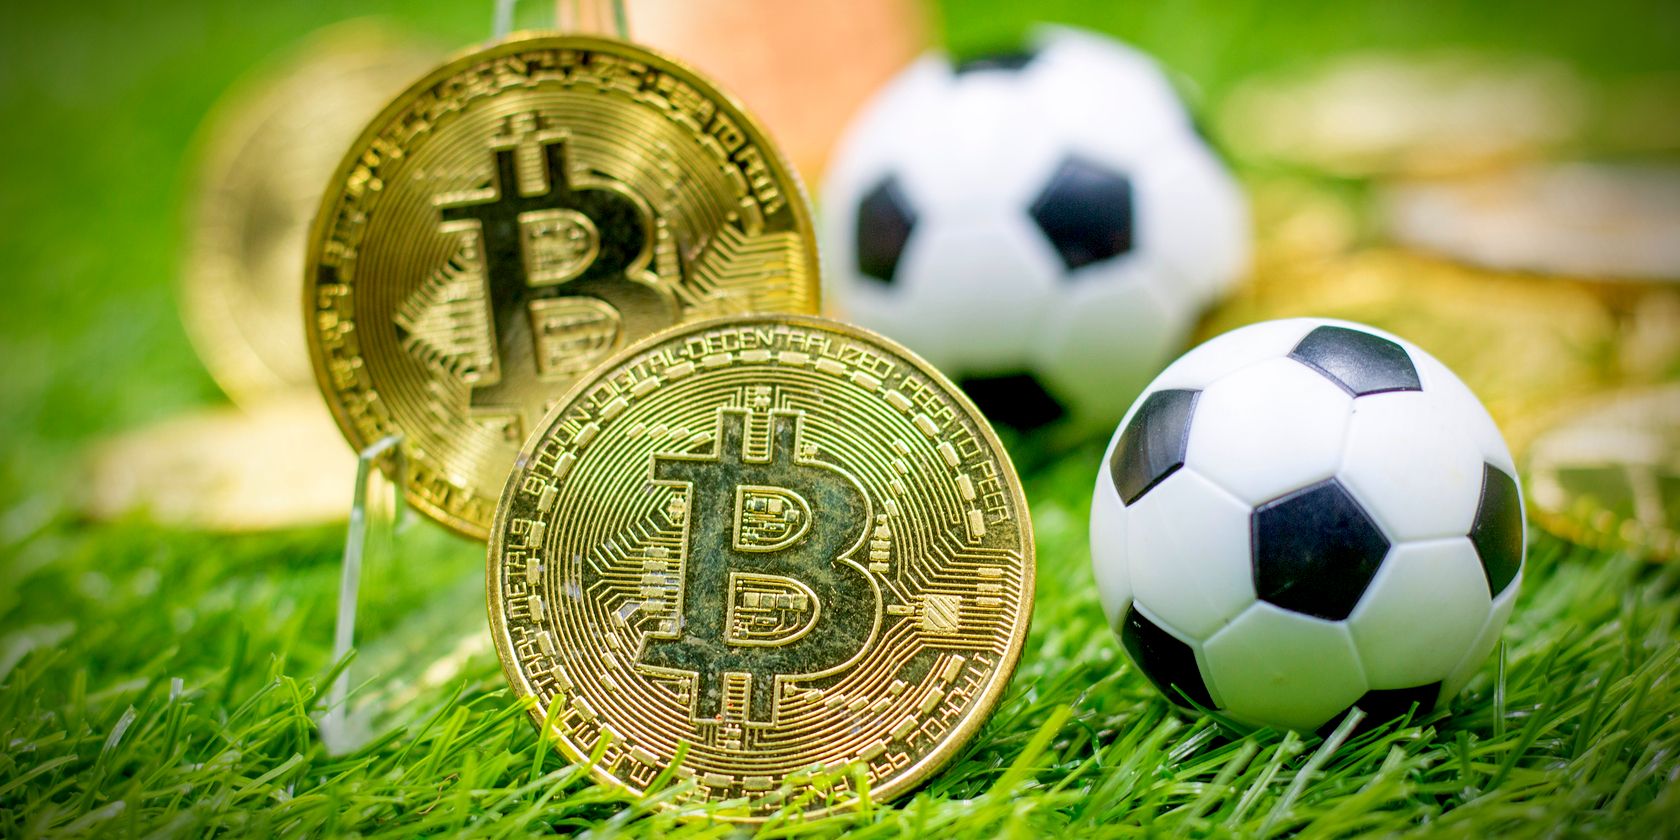 Soccer Coin Launches Sports-Based New Currency